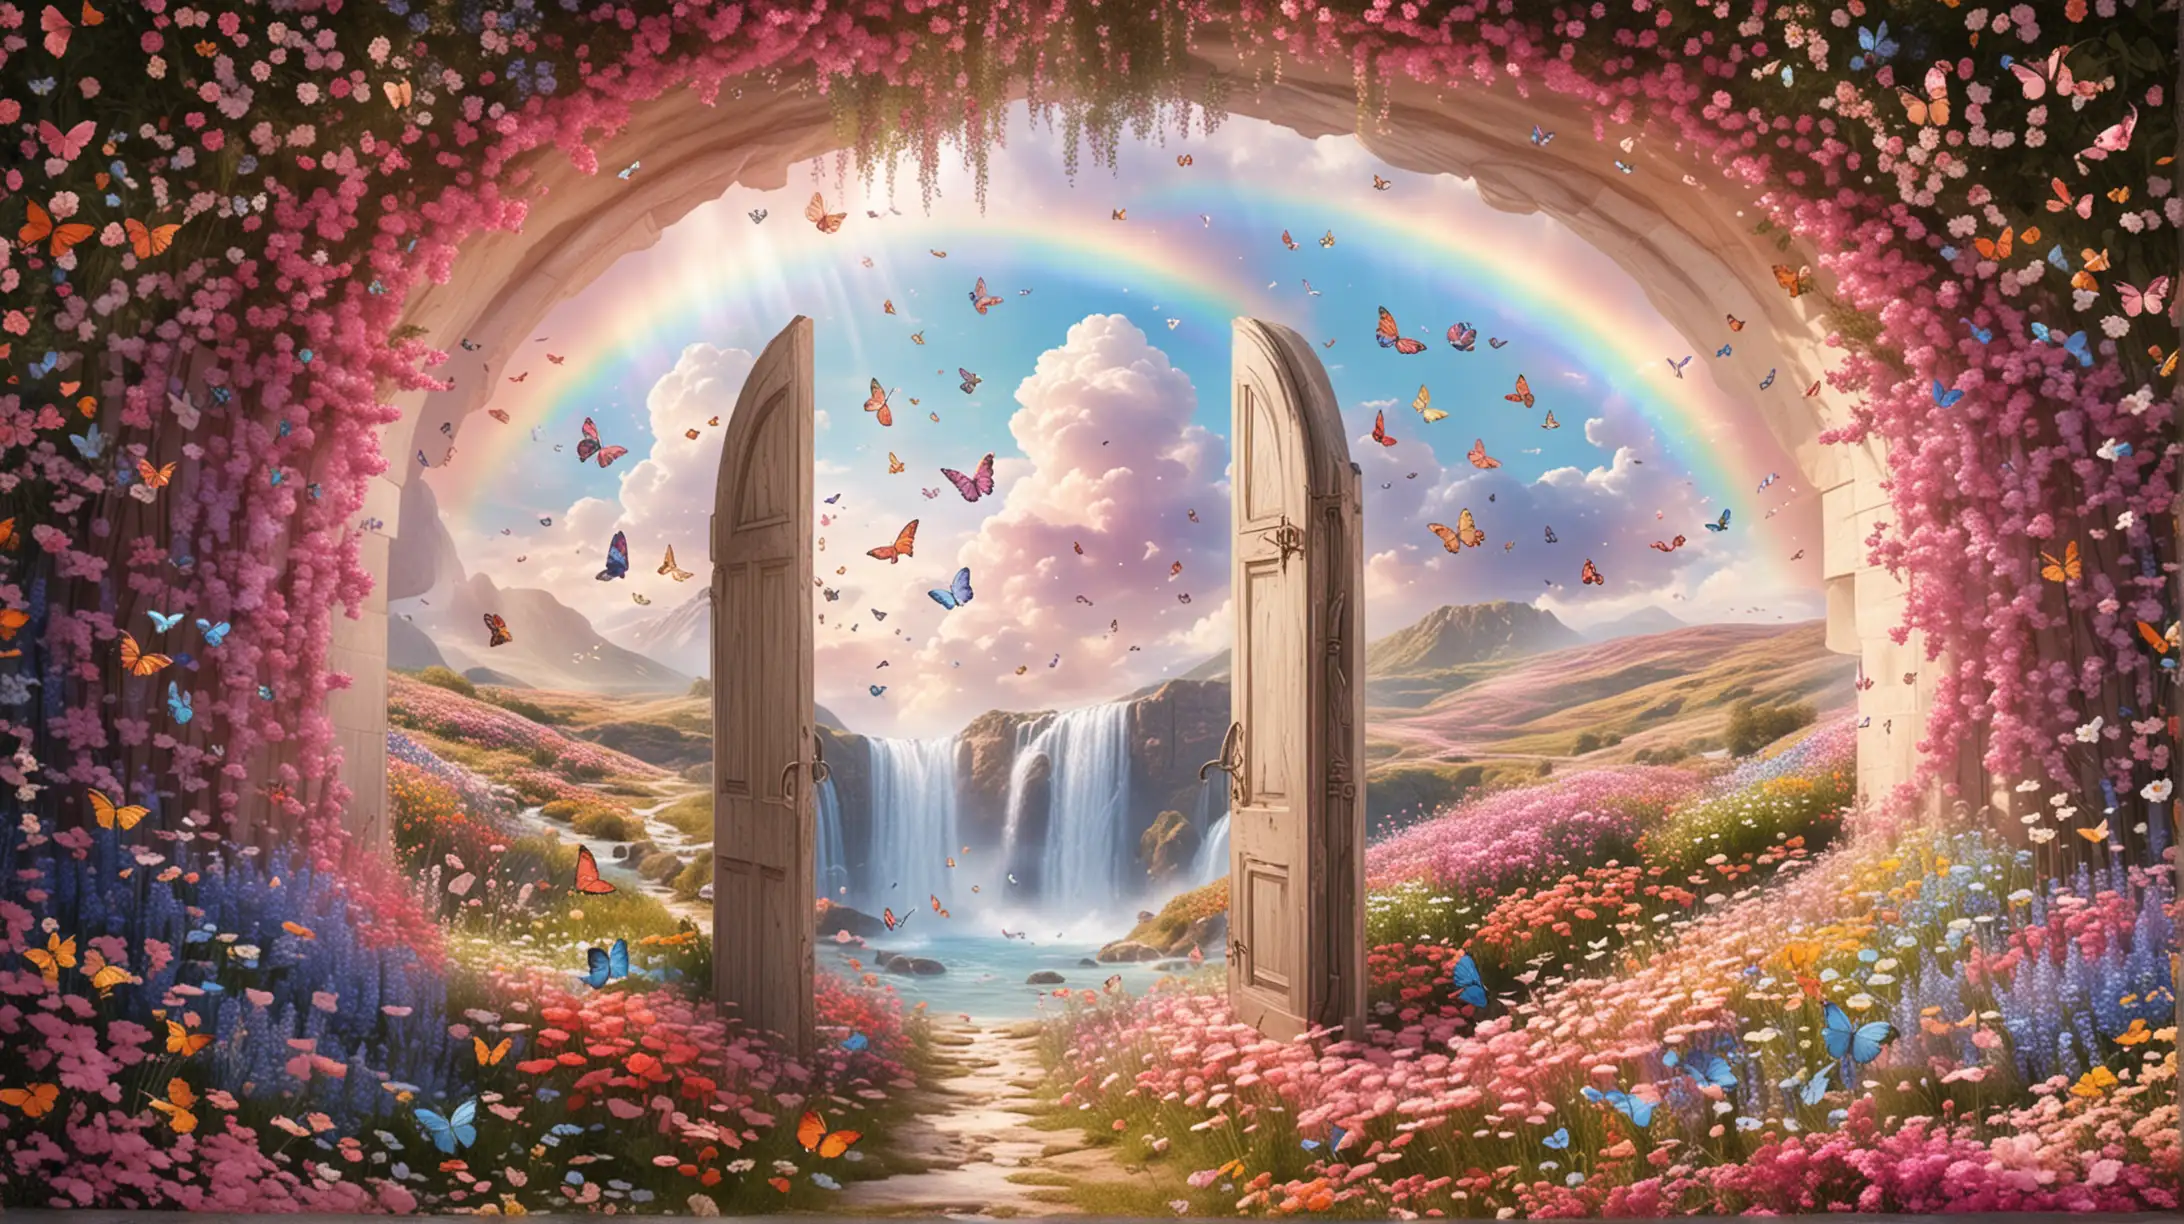 Enchanting Flower Field Waterfall Pastel Rainbow Heaven with Fairies and Butterflies